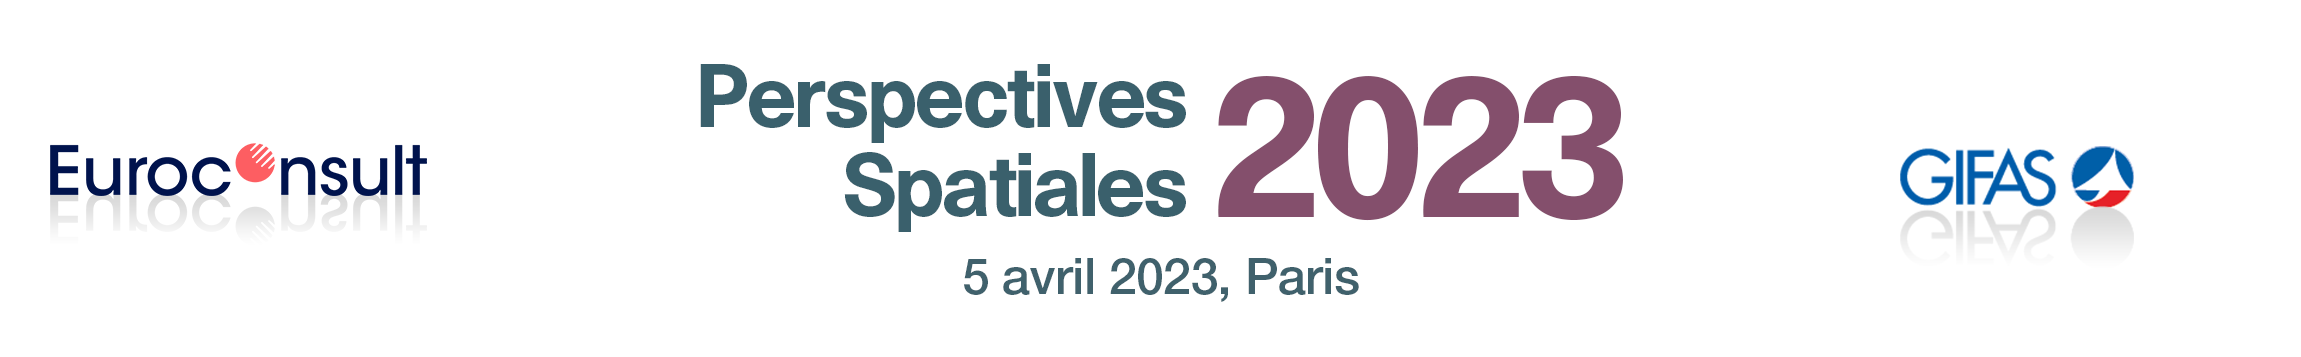 Perspectives Spatiales 2023